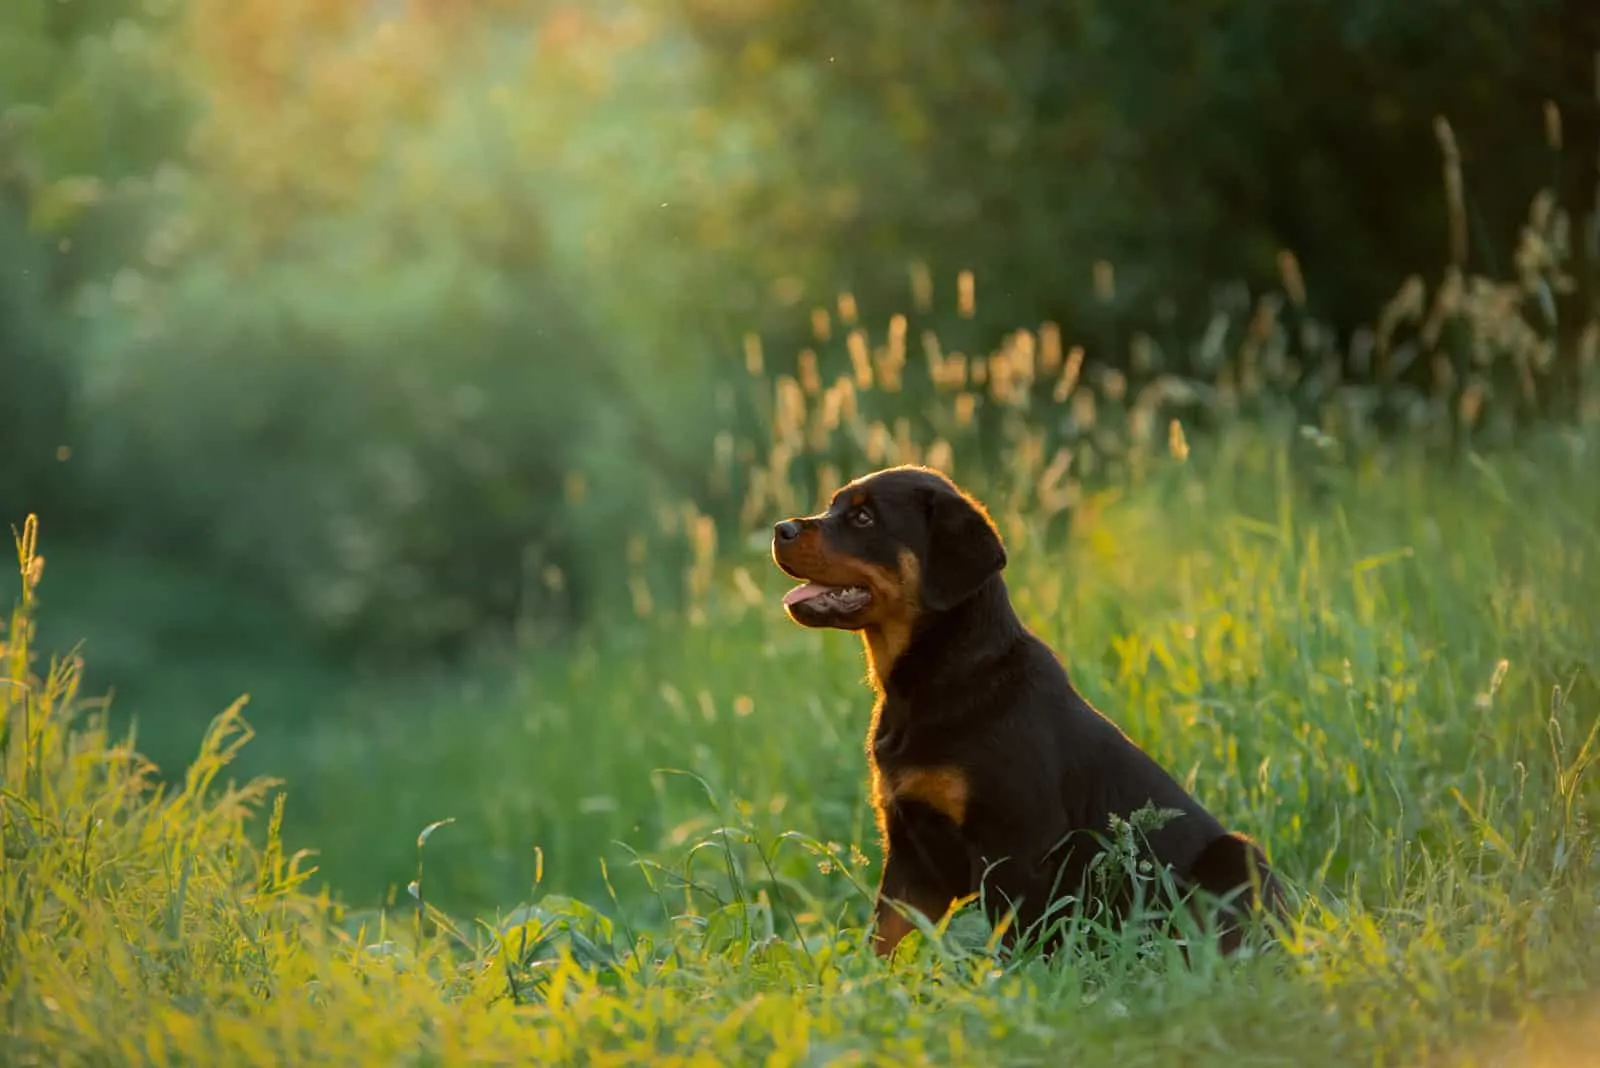 The Rottweiler is sitting in the green grass